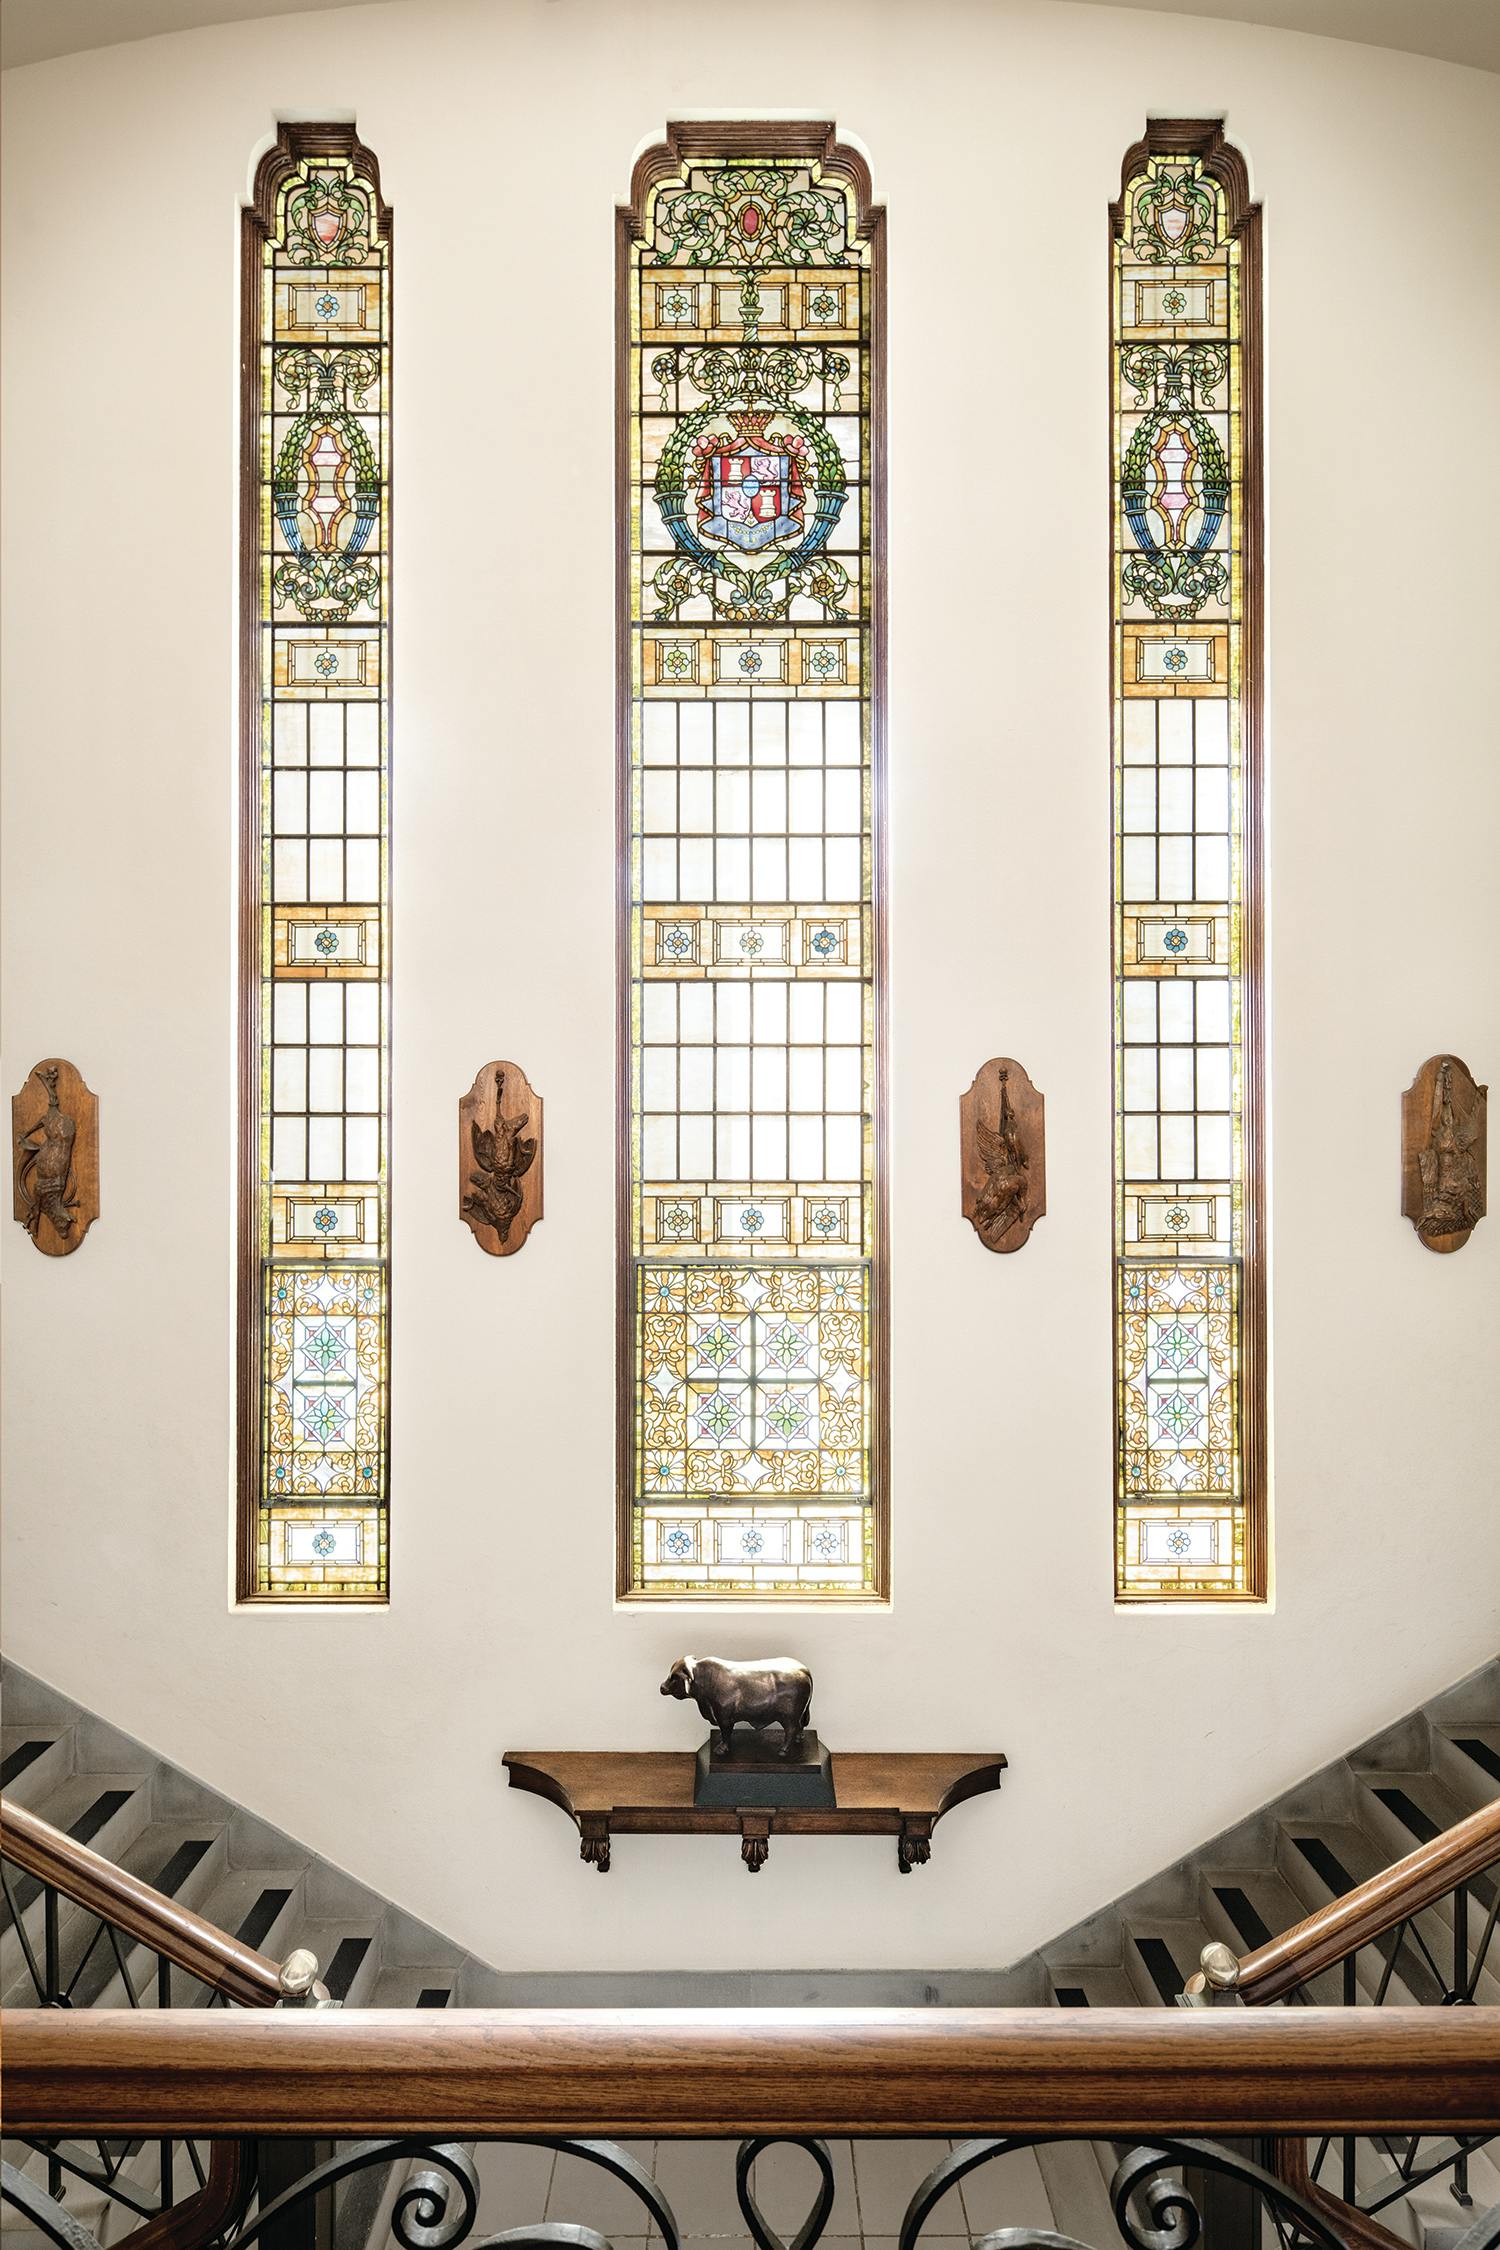 The famed Tiffany windows inside the King Ranch Main House contain nine thousand pieces of stained glass.